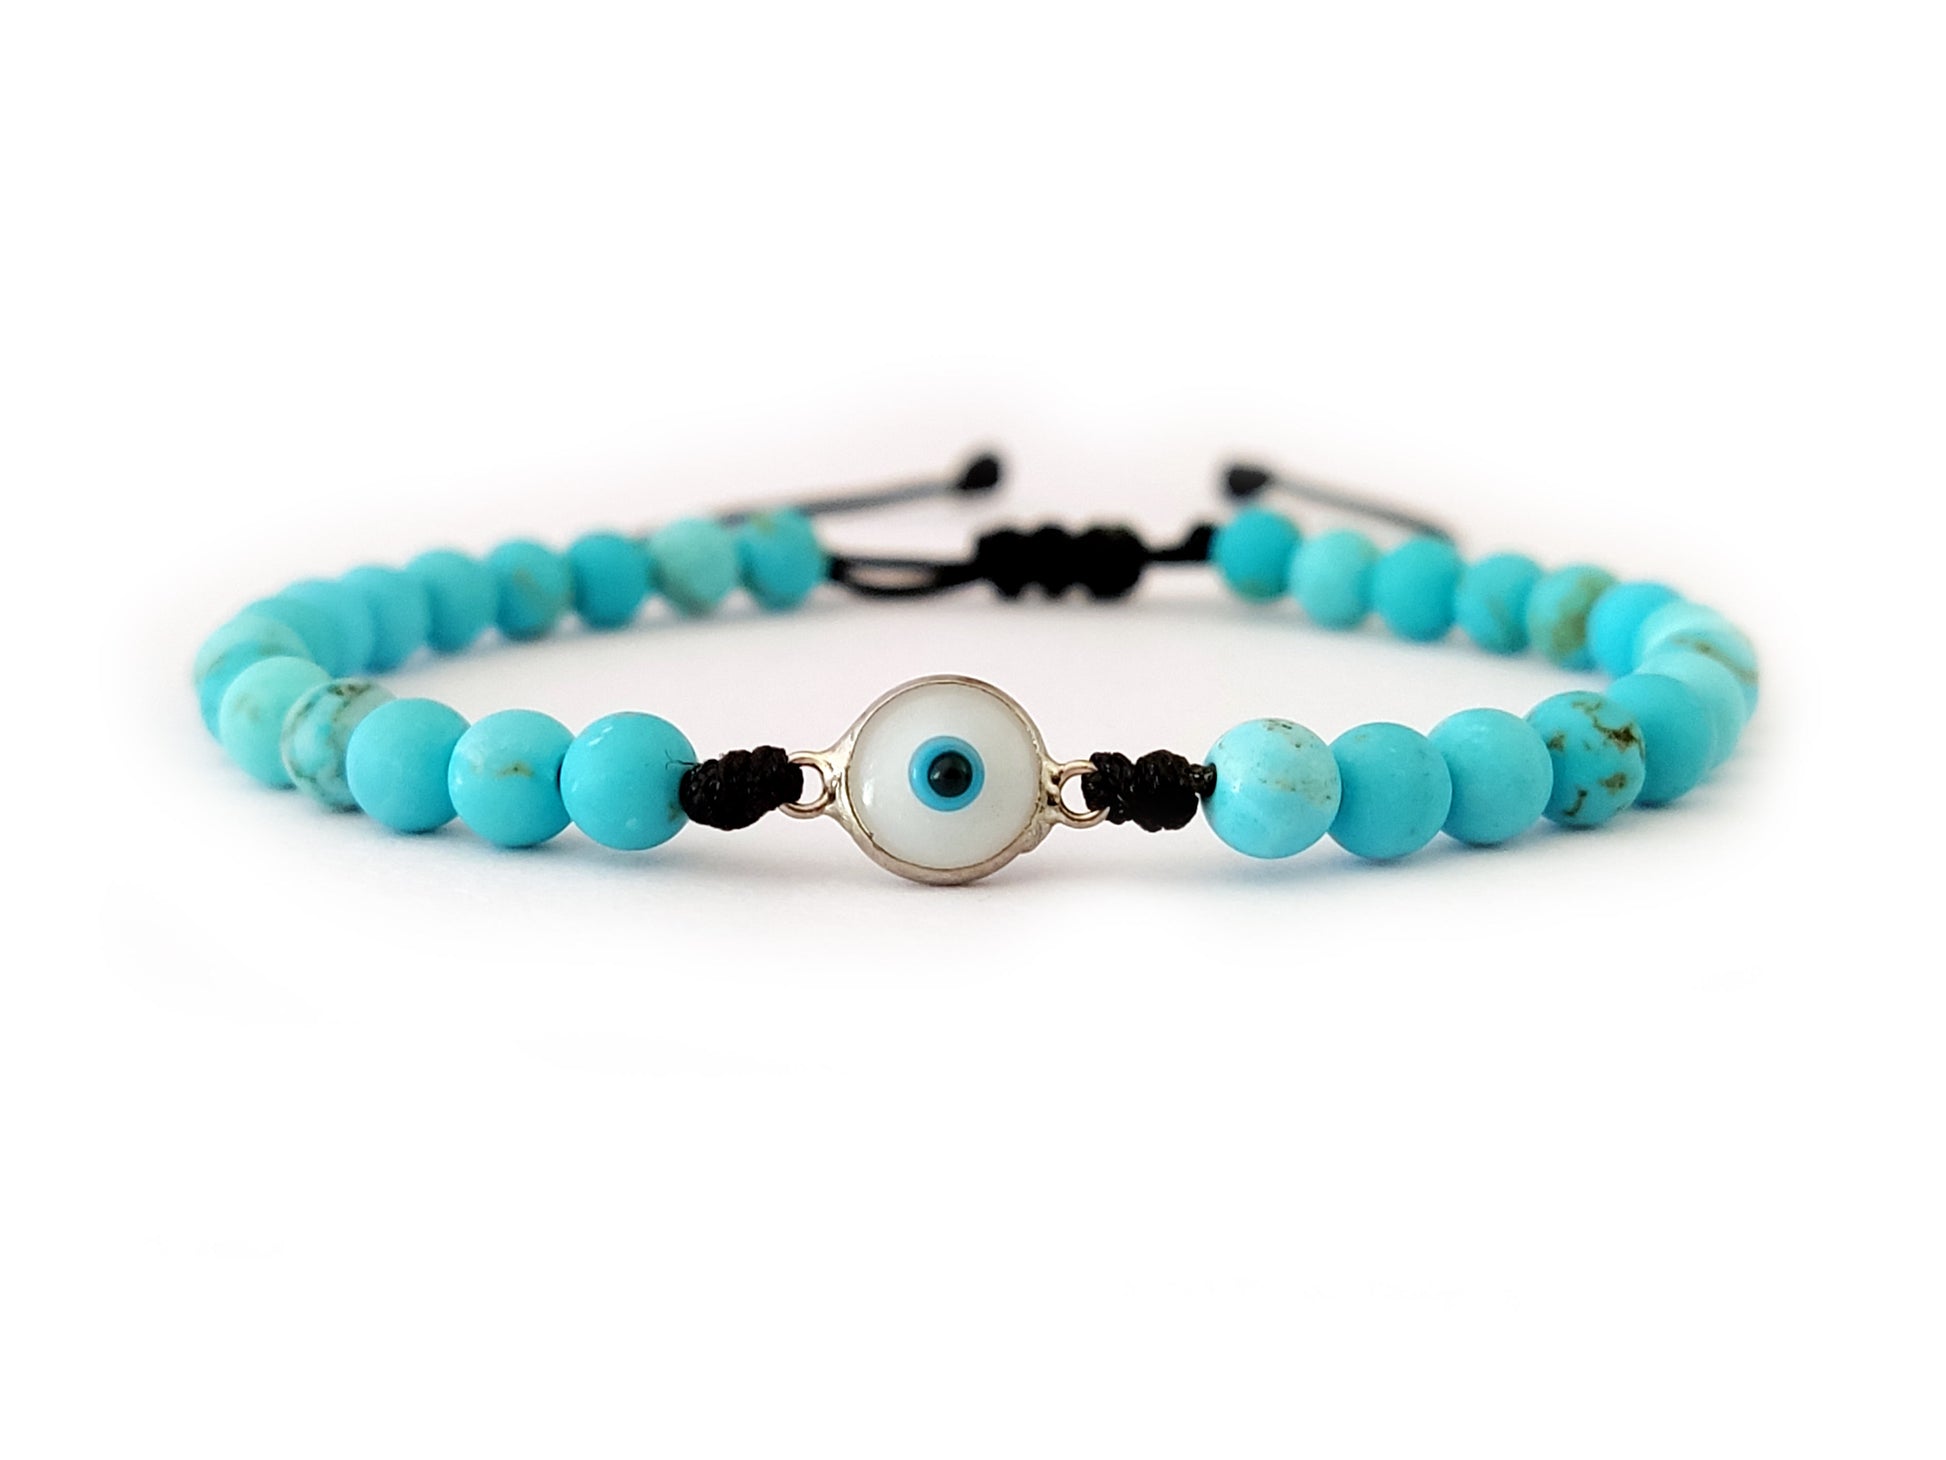 Silver 925 Evil Eye Bracelet with Turquoise Stones - Handcrafted in Greece